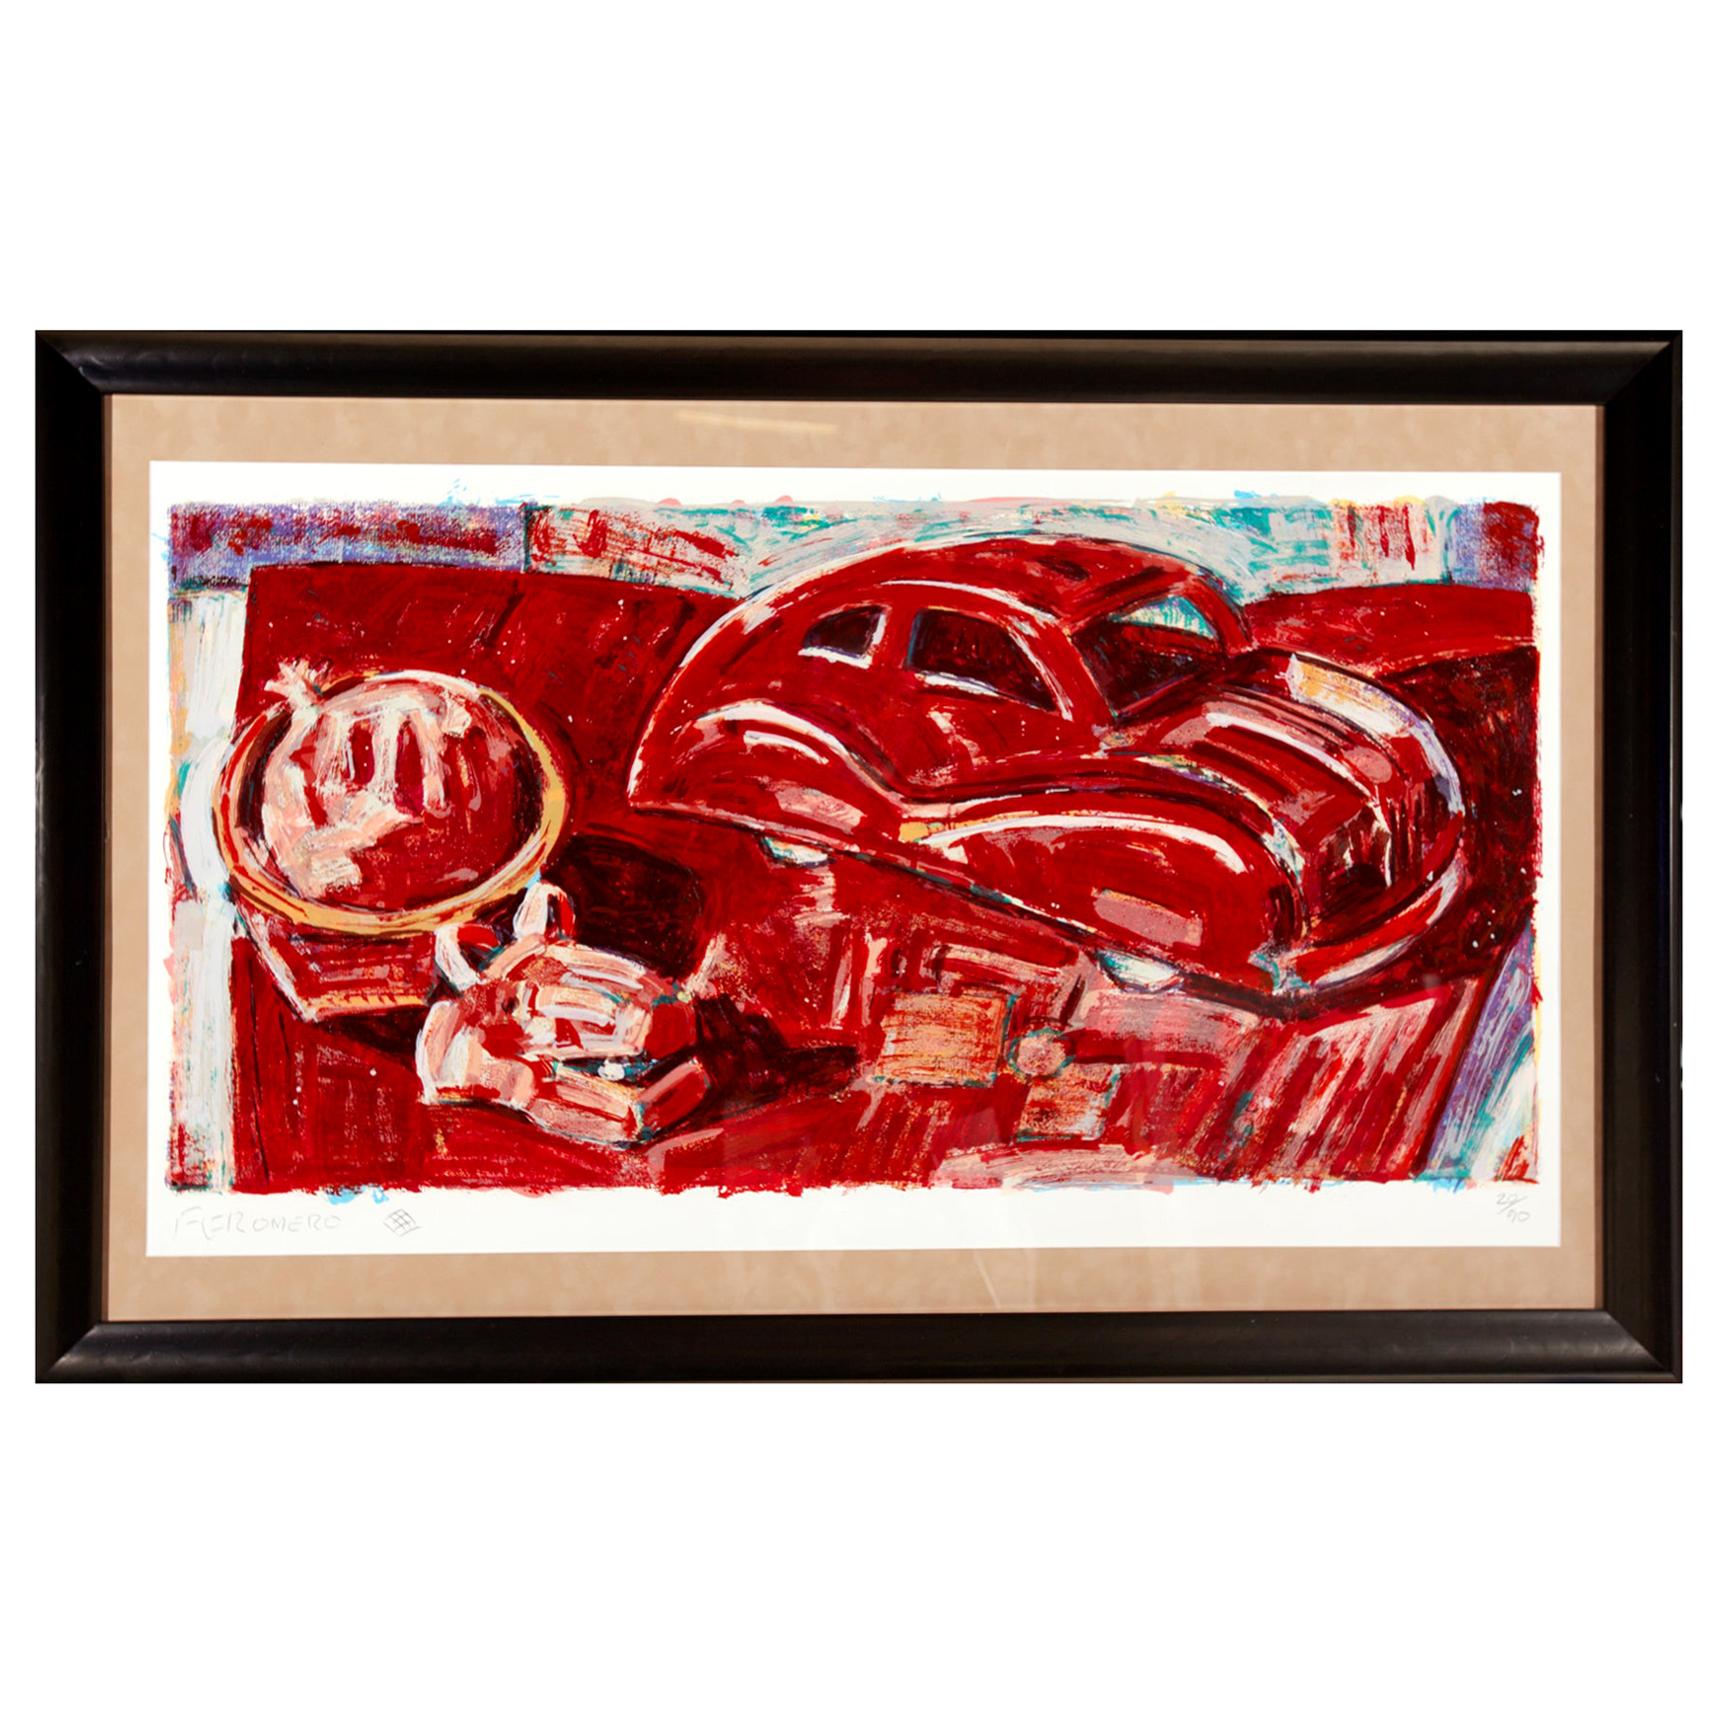 Frank Romero Signed Serigraph Limited Edition #20/90, Red Car